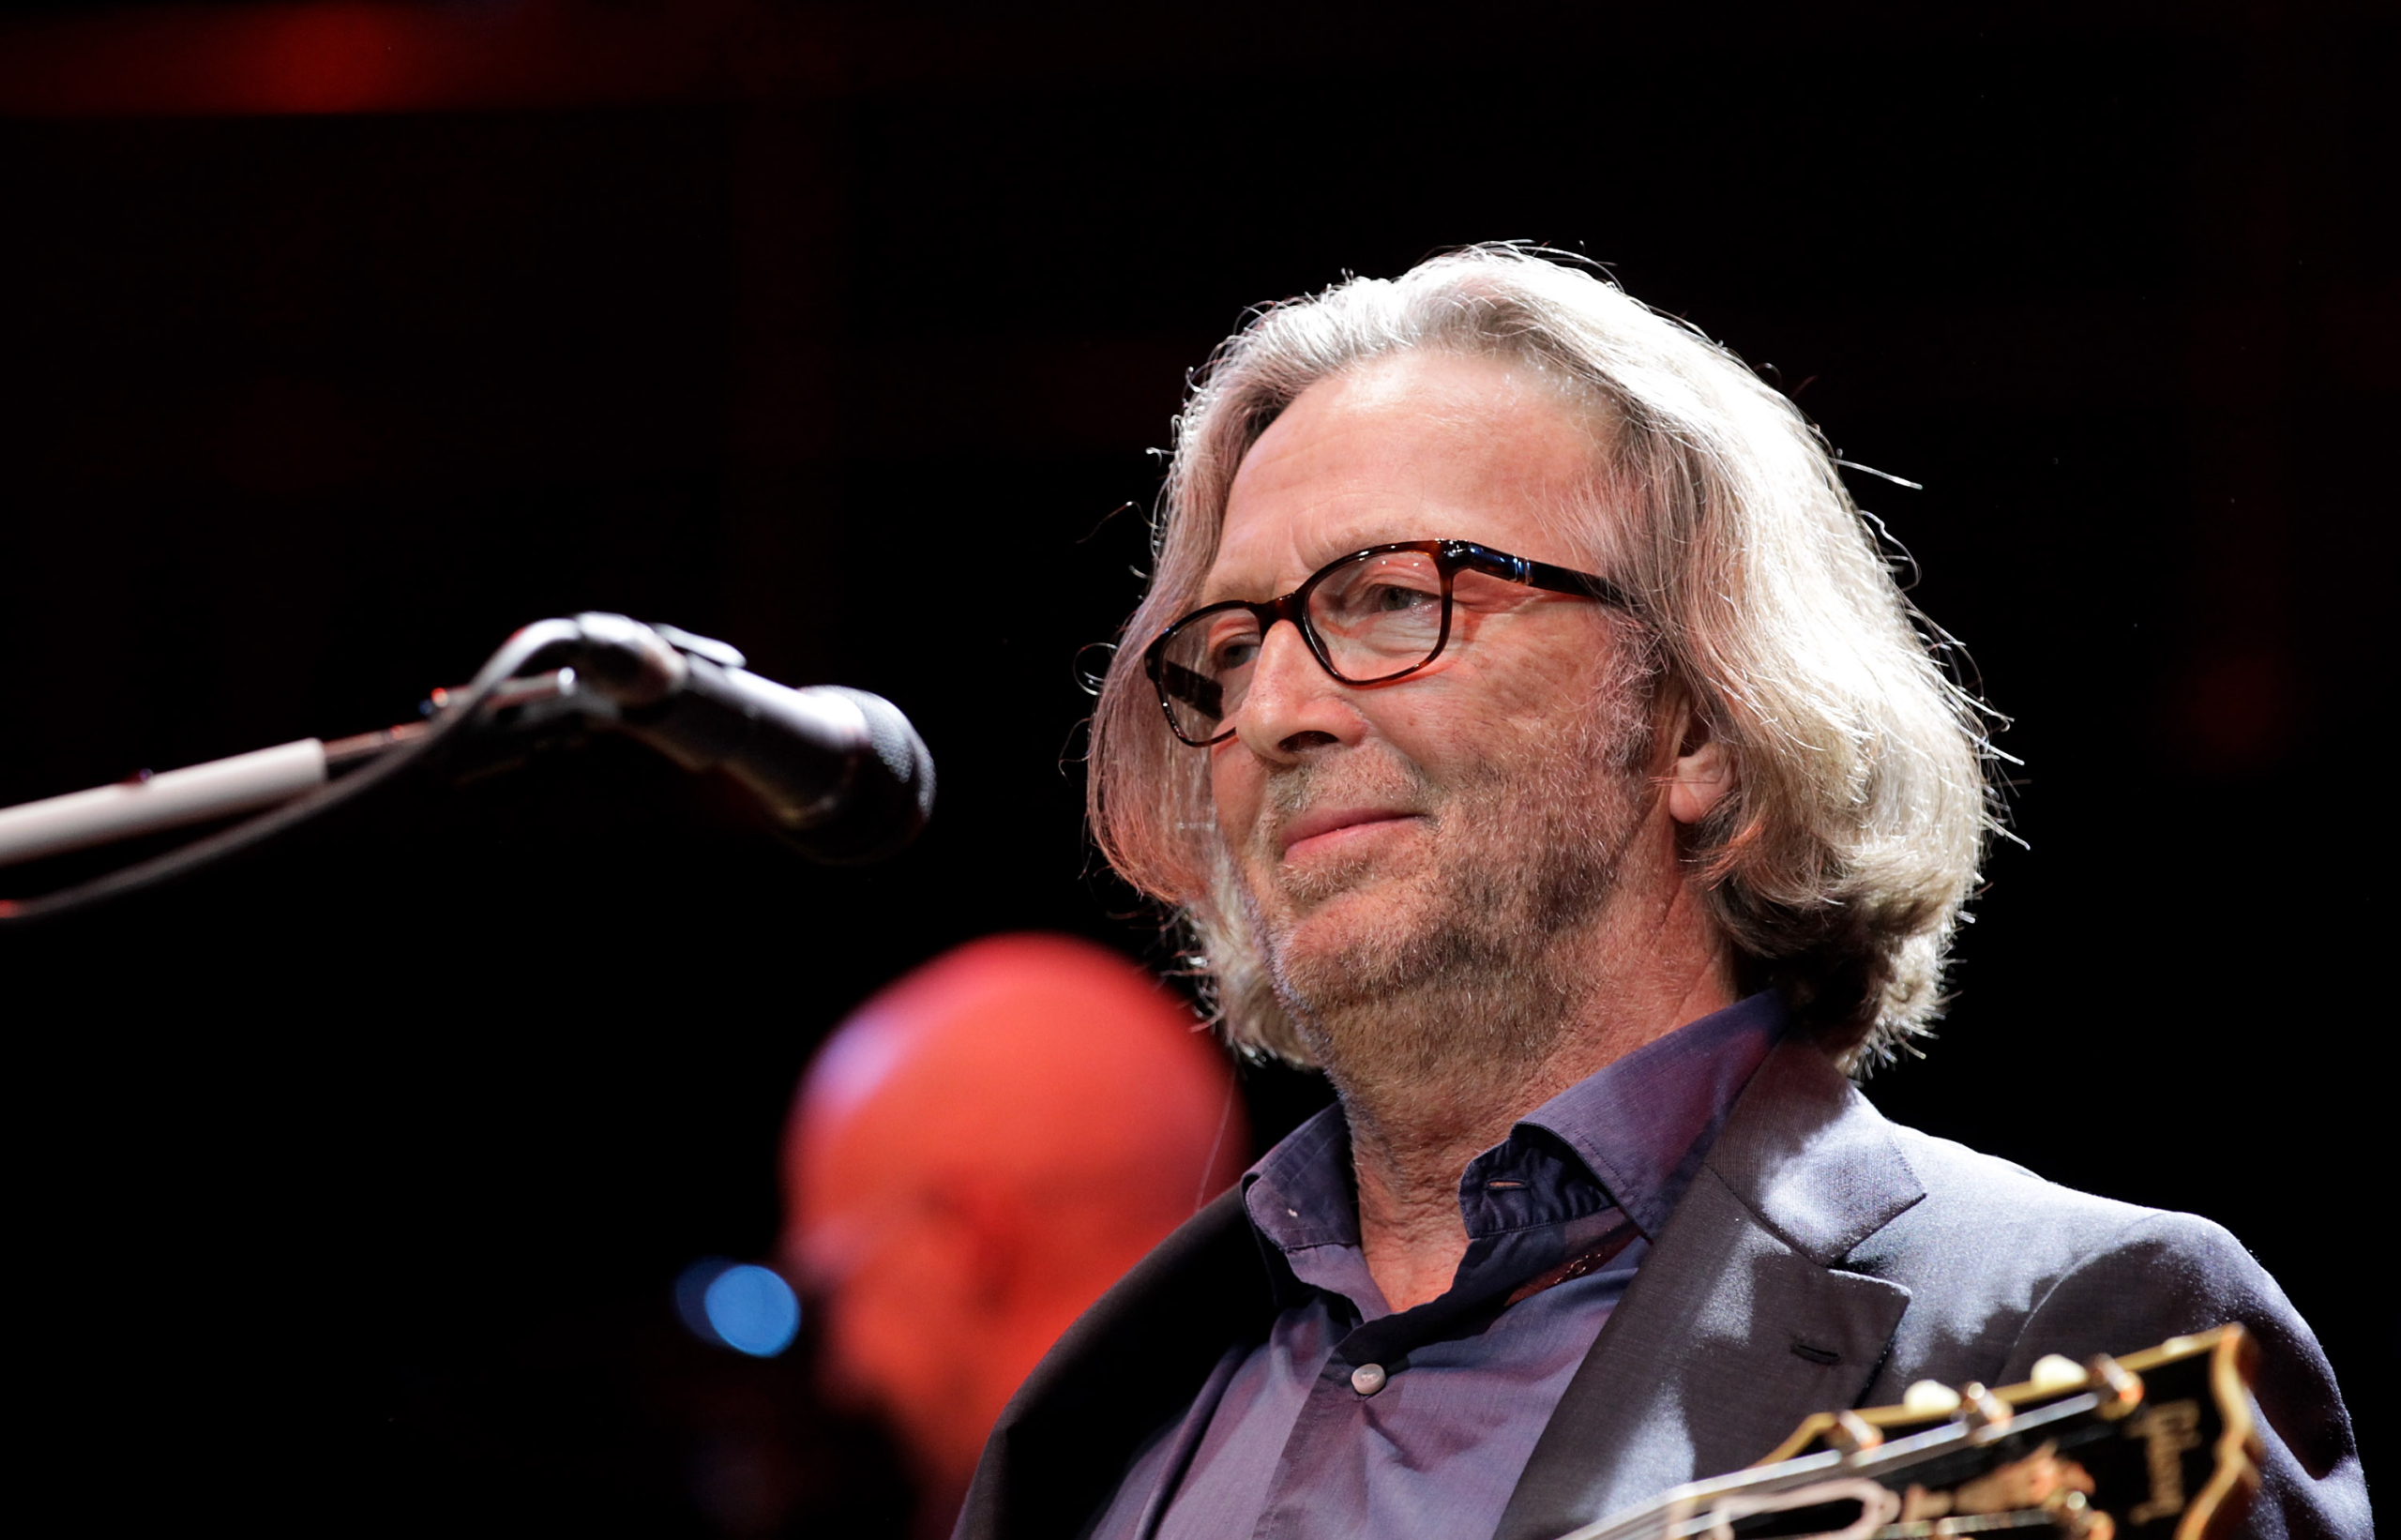 Check out new Music from Eric Clapton